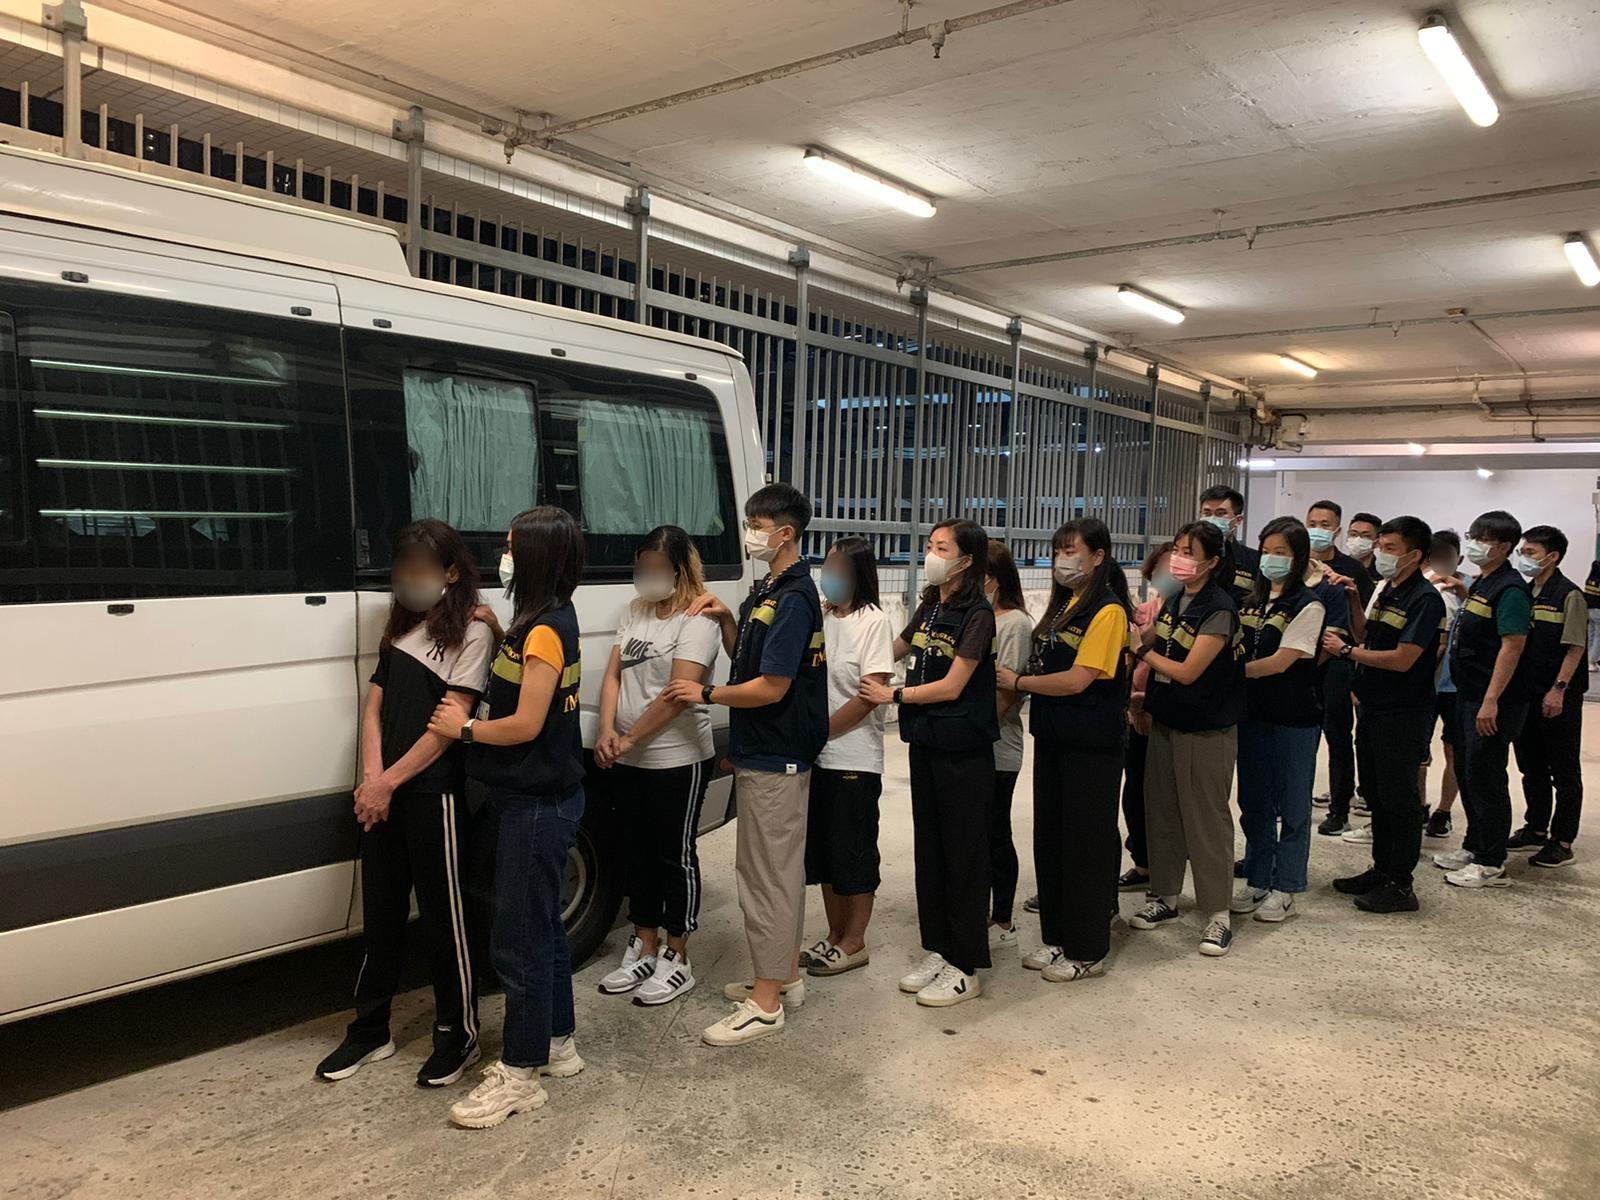 The Immigration Department mounted a series of territory-wide anti-illegal worker operations codenamed "Lightshadow" and "Twilight" for three consecutive days from June 27 to yesterday (June 29). Photo shows suspected illegal workers arrested during an operation.